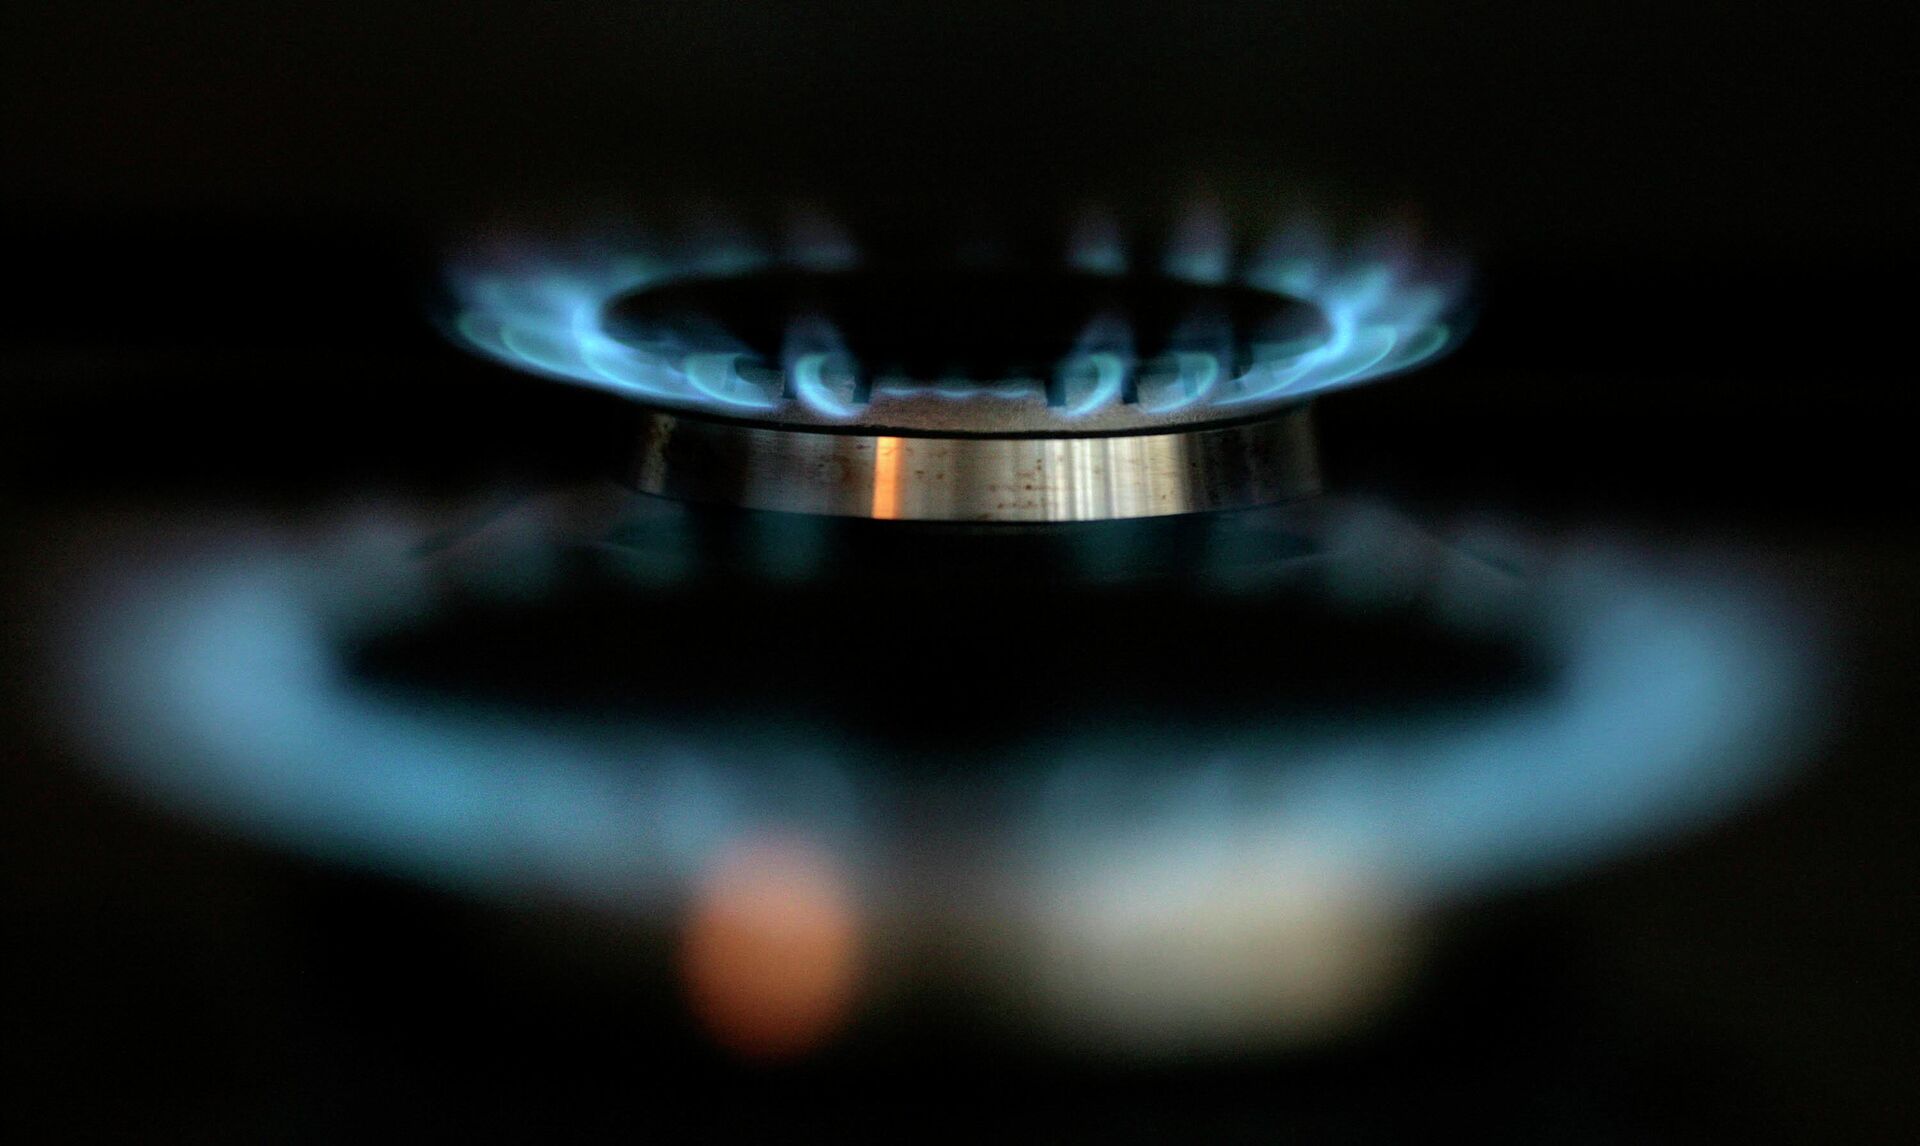 A picture taken 18 January 2008 shows the gas burner of a stove in London. United Kingdom's biggest energy provider, British Gas, 18 January 2008, announced an immediate price rise of 15% for its gas and electricity customers - Sputnik International, 1920, 01.09.2022